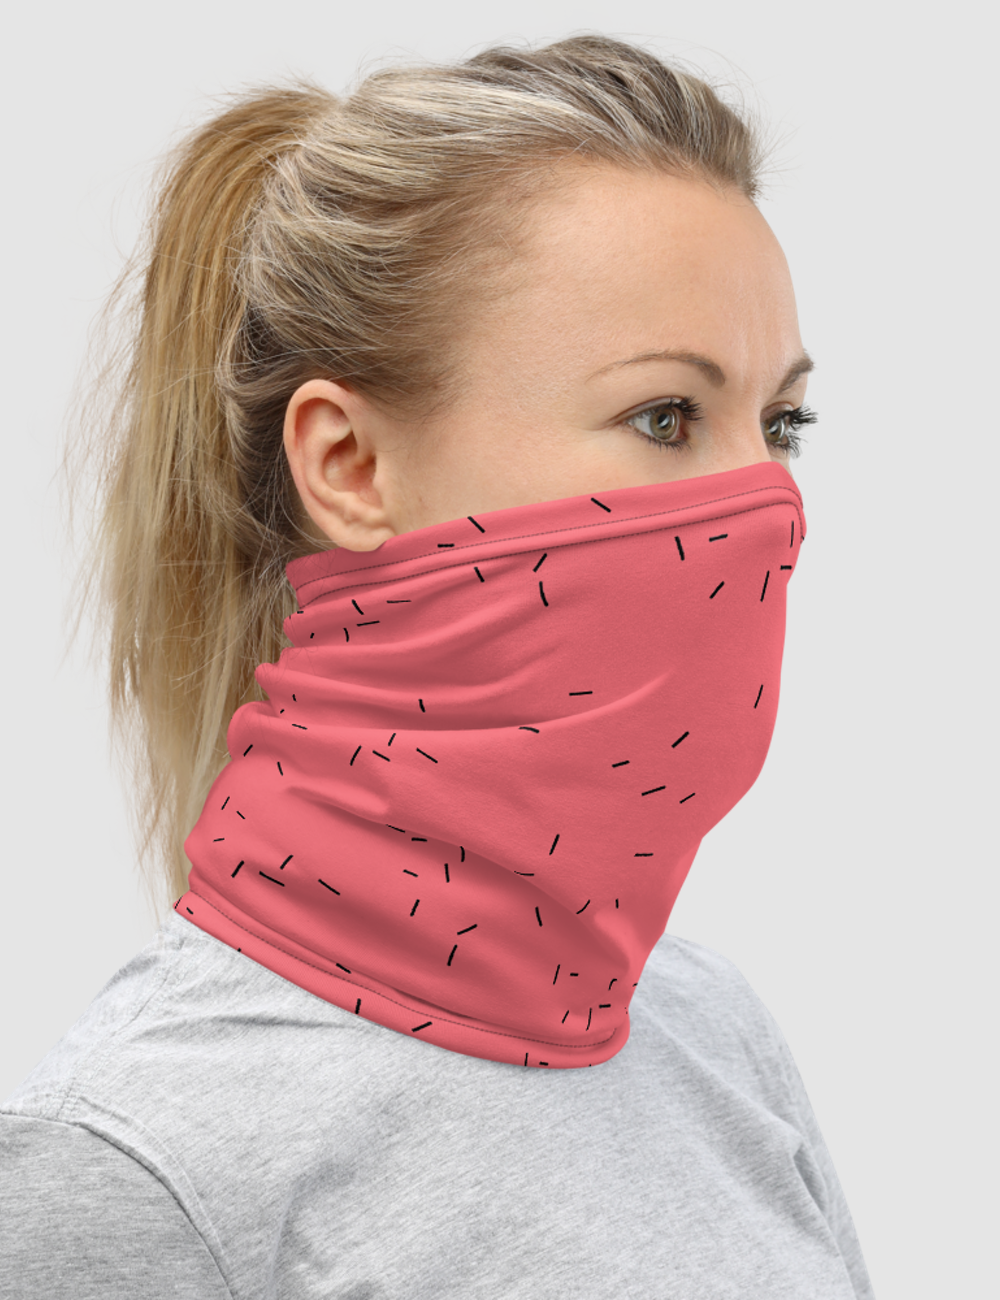 Abstract Black And Begonia Sprinkles | Neck Gaiter Face Mask OniTakai